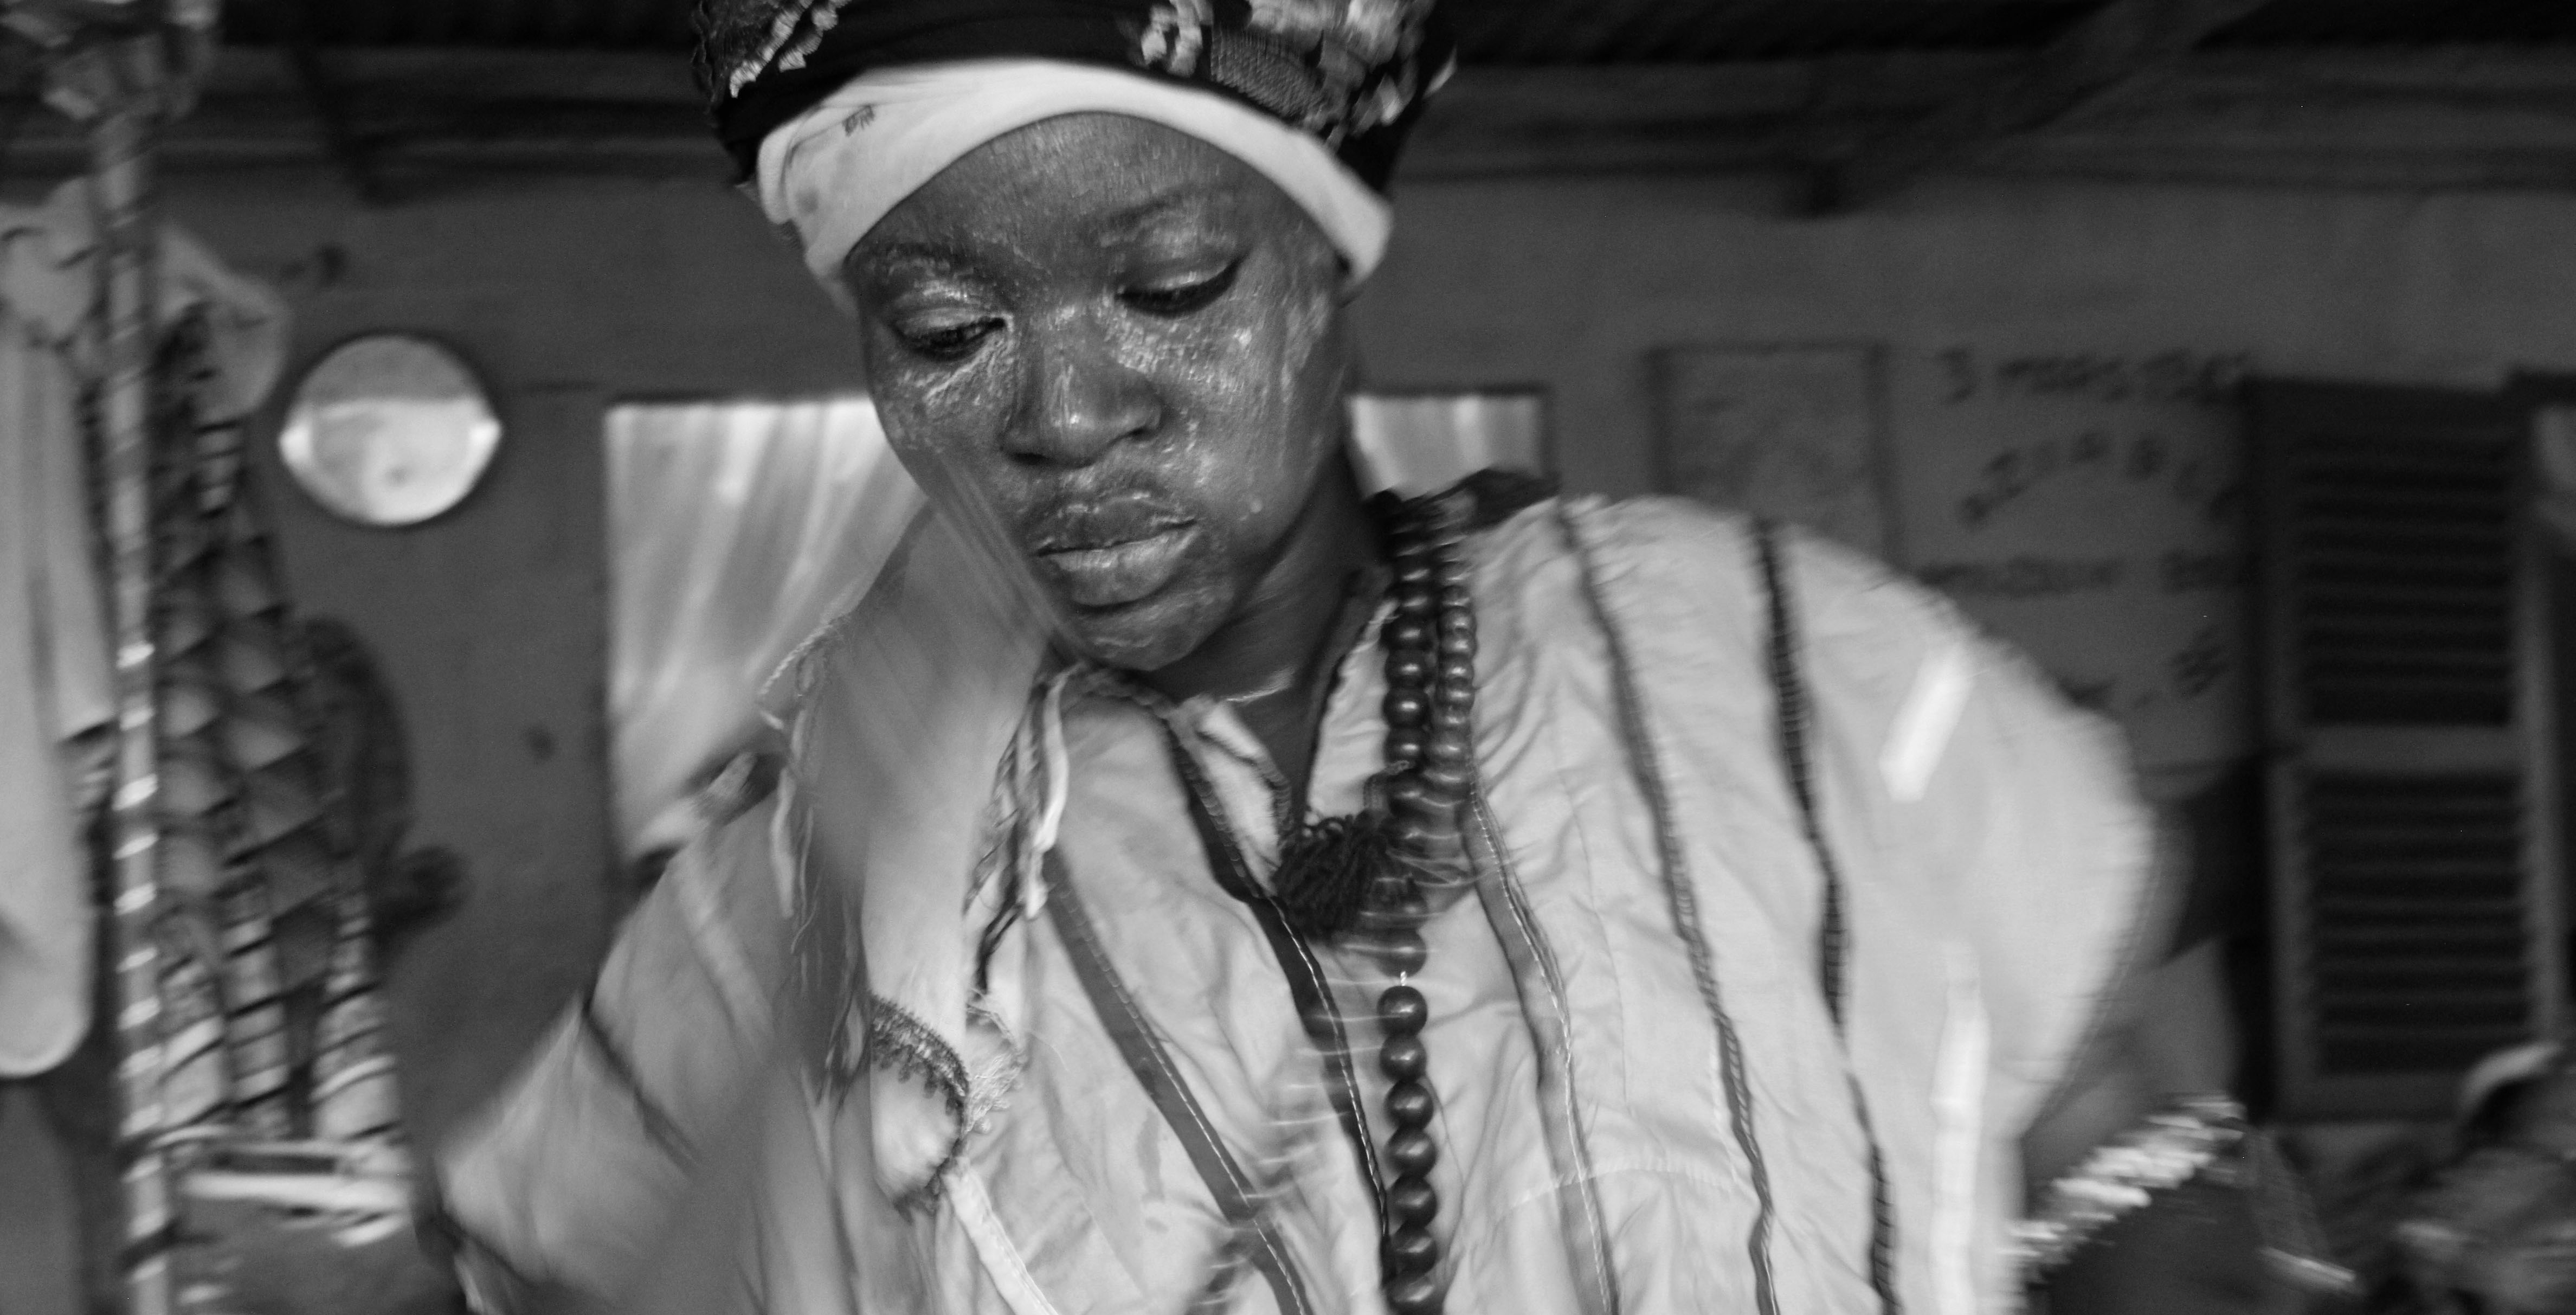 A black and white image of a black woman wearing traditional headress and beads. She also has what appears to be white paint on her face.